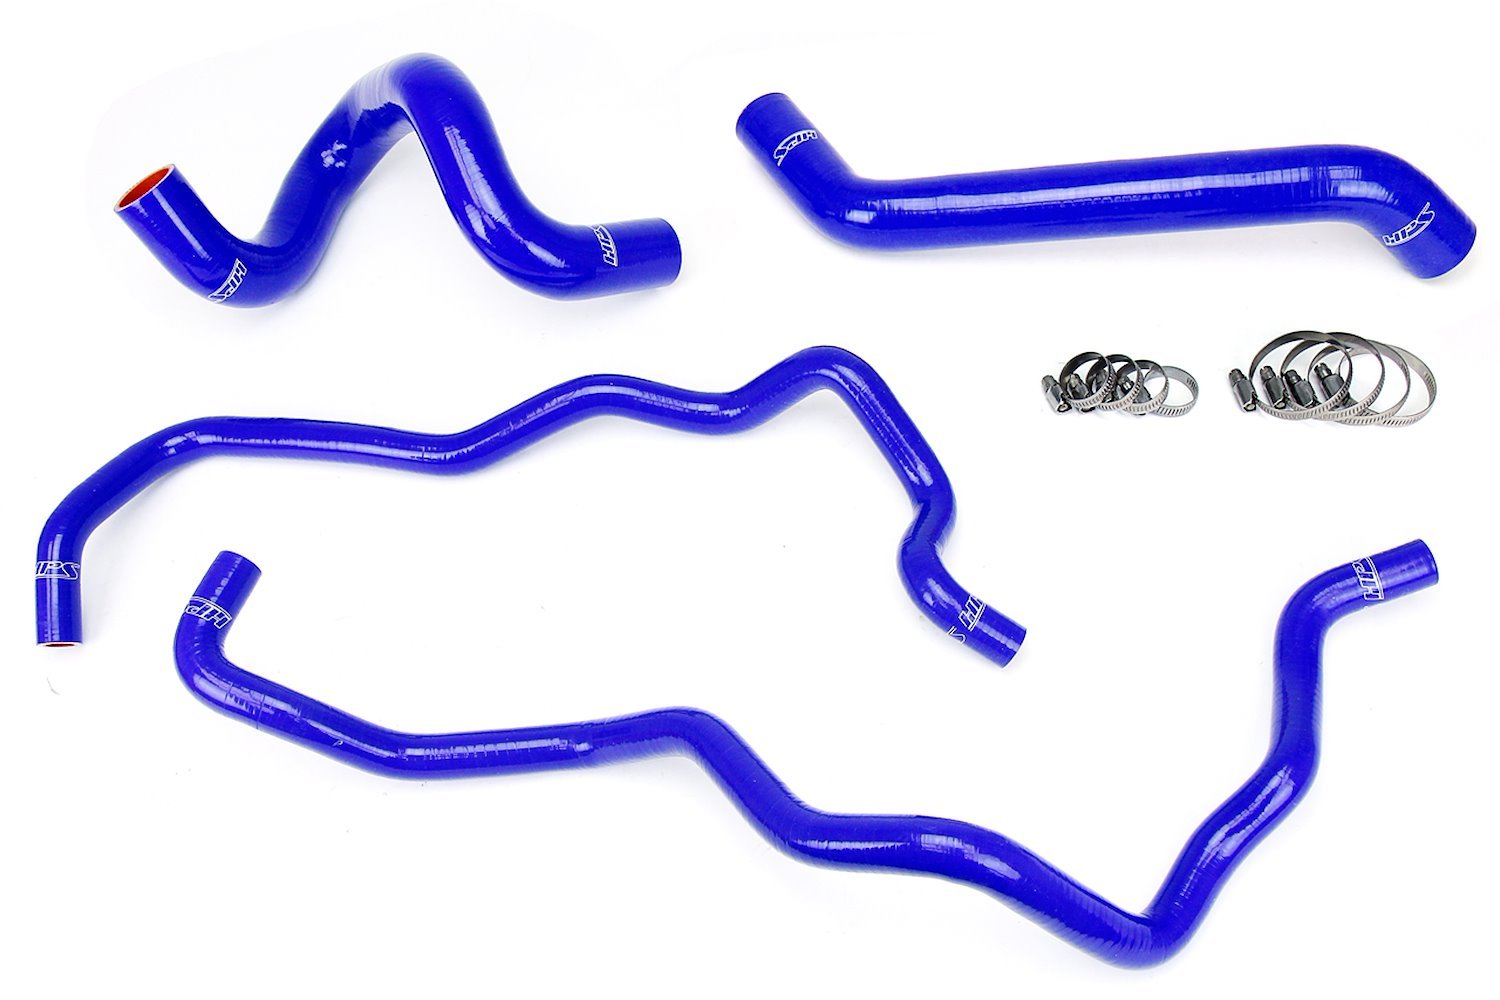 57-1220-BLUE Coolant Hose Kit, High-Temp 3-Ply Reinforced Silicone, Replace Rubber Radiator Heater Coolant Hoses